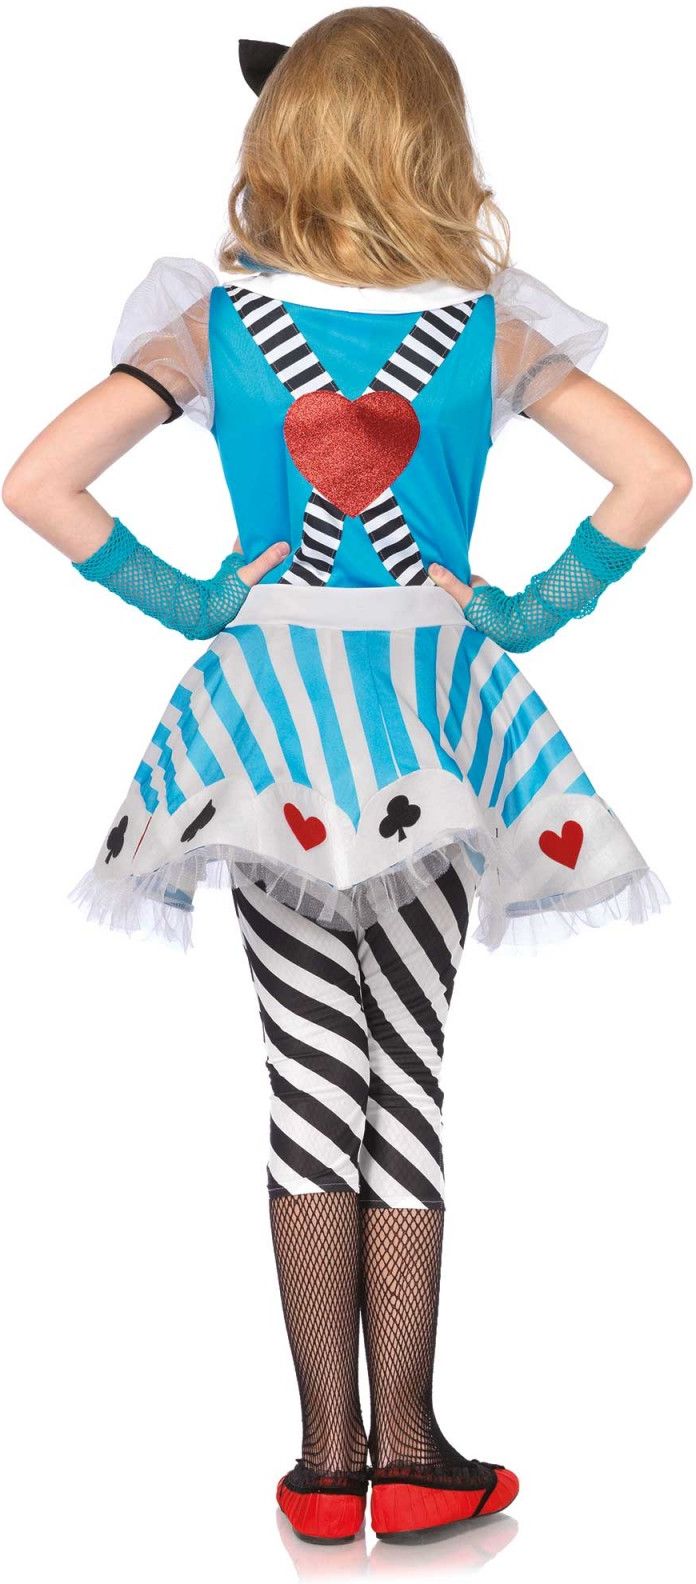 Alice in Wonderland outfit kind